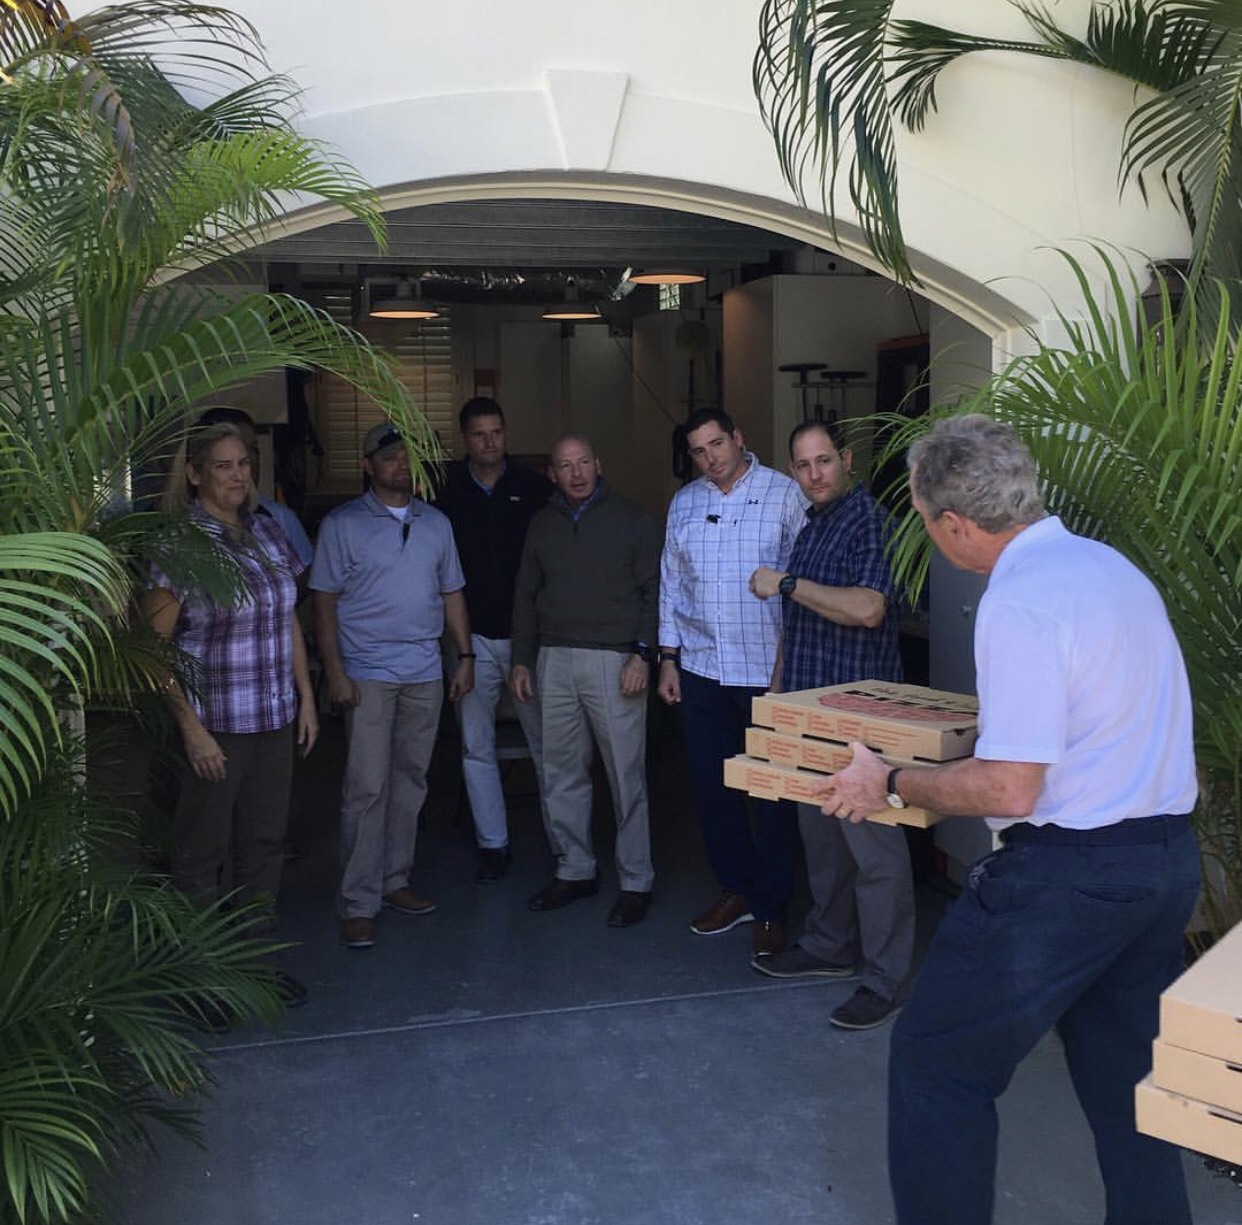 Former president George W. Bush hands pizza to his secret service personnel. (Photo Courtesy Instagram)